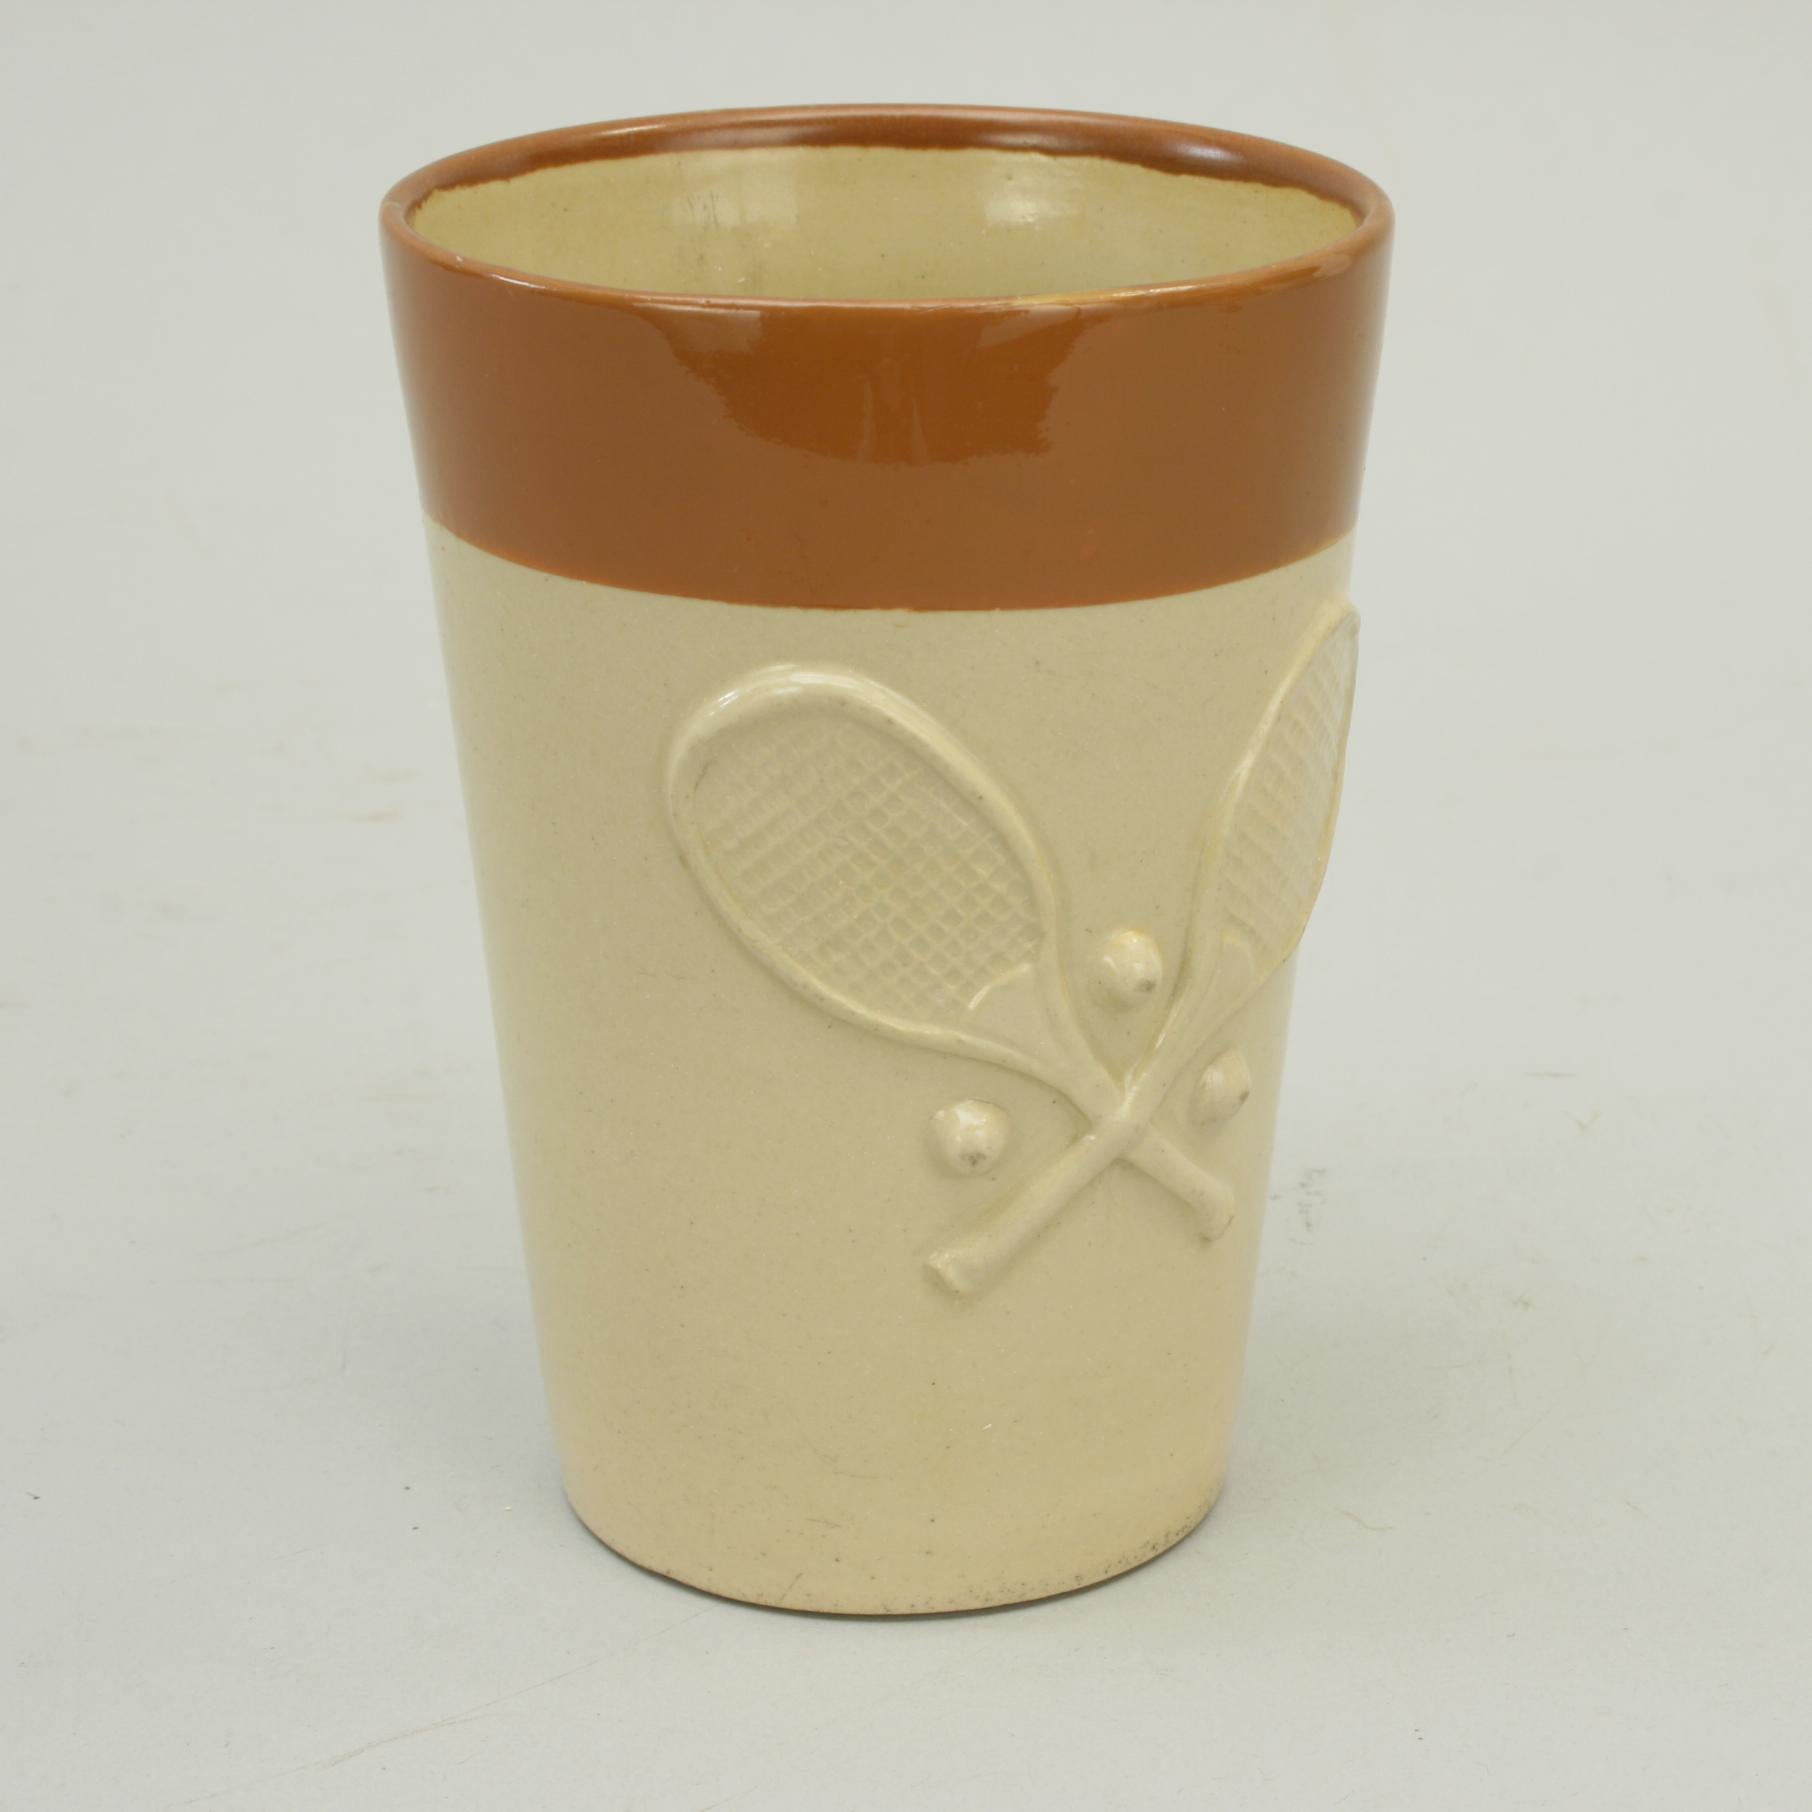 Tennis-themed beaker.
A very nice 'Denby' pottery tennis themed beaker. The tennis ceramic is decorated, in relief, with two crossed convex wedge lawn tennis rackets with three balls. The main body of the cup is pale brown with a treacle brown